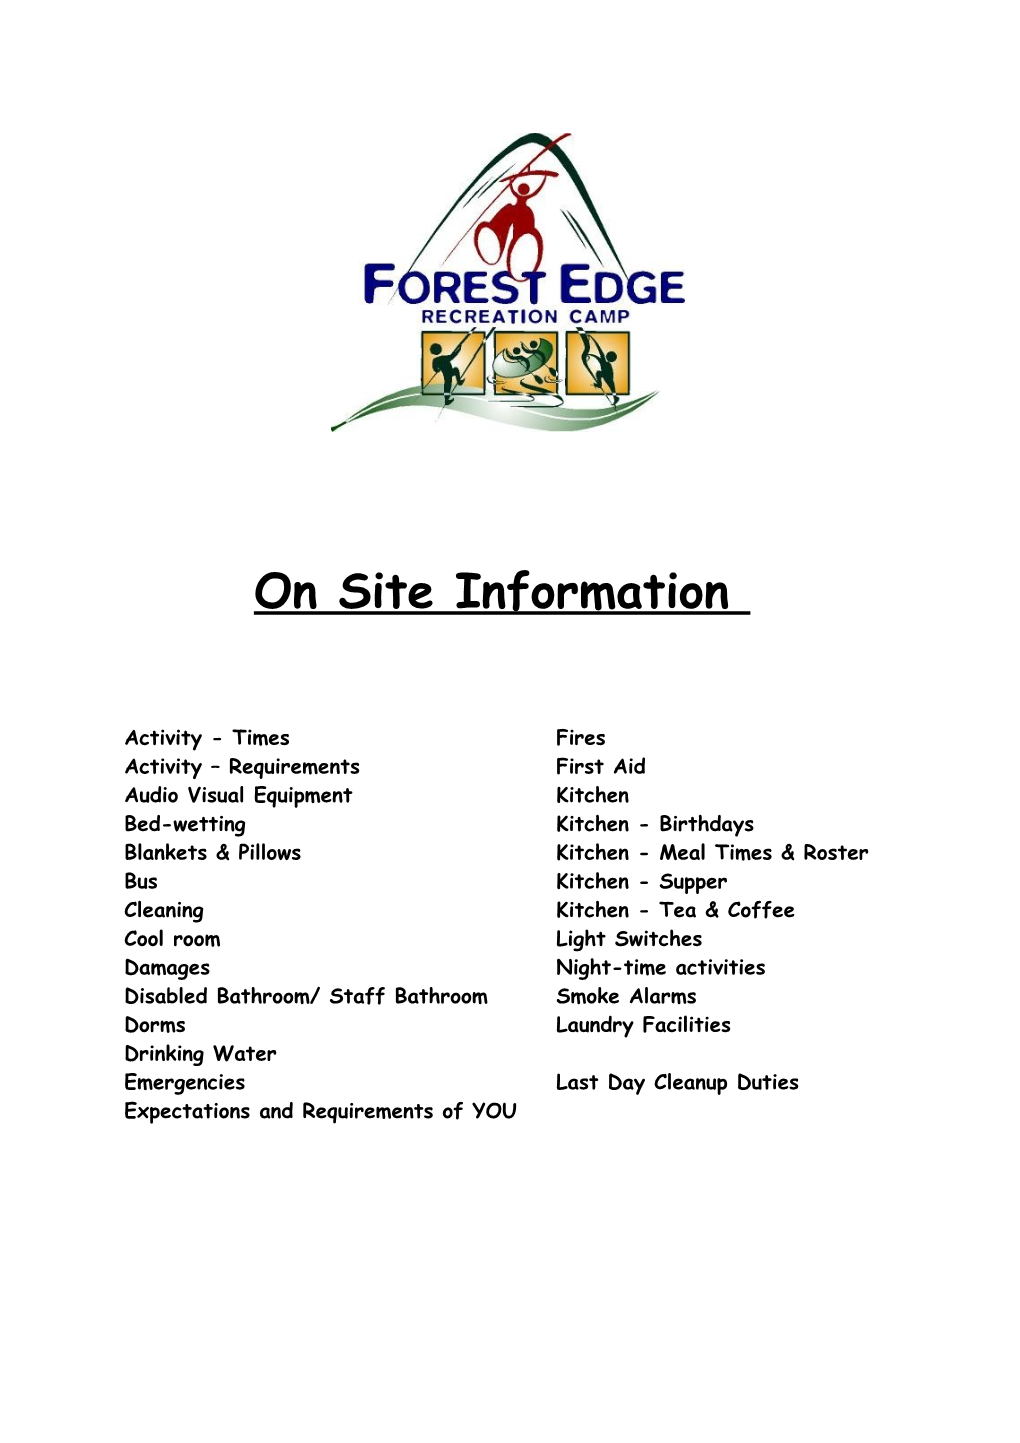 On Site Information